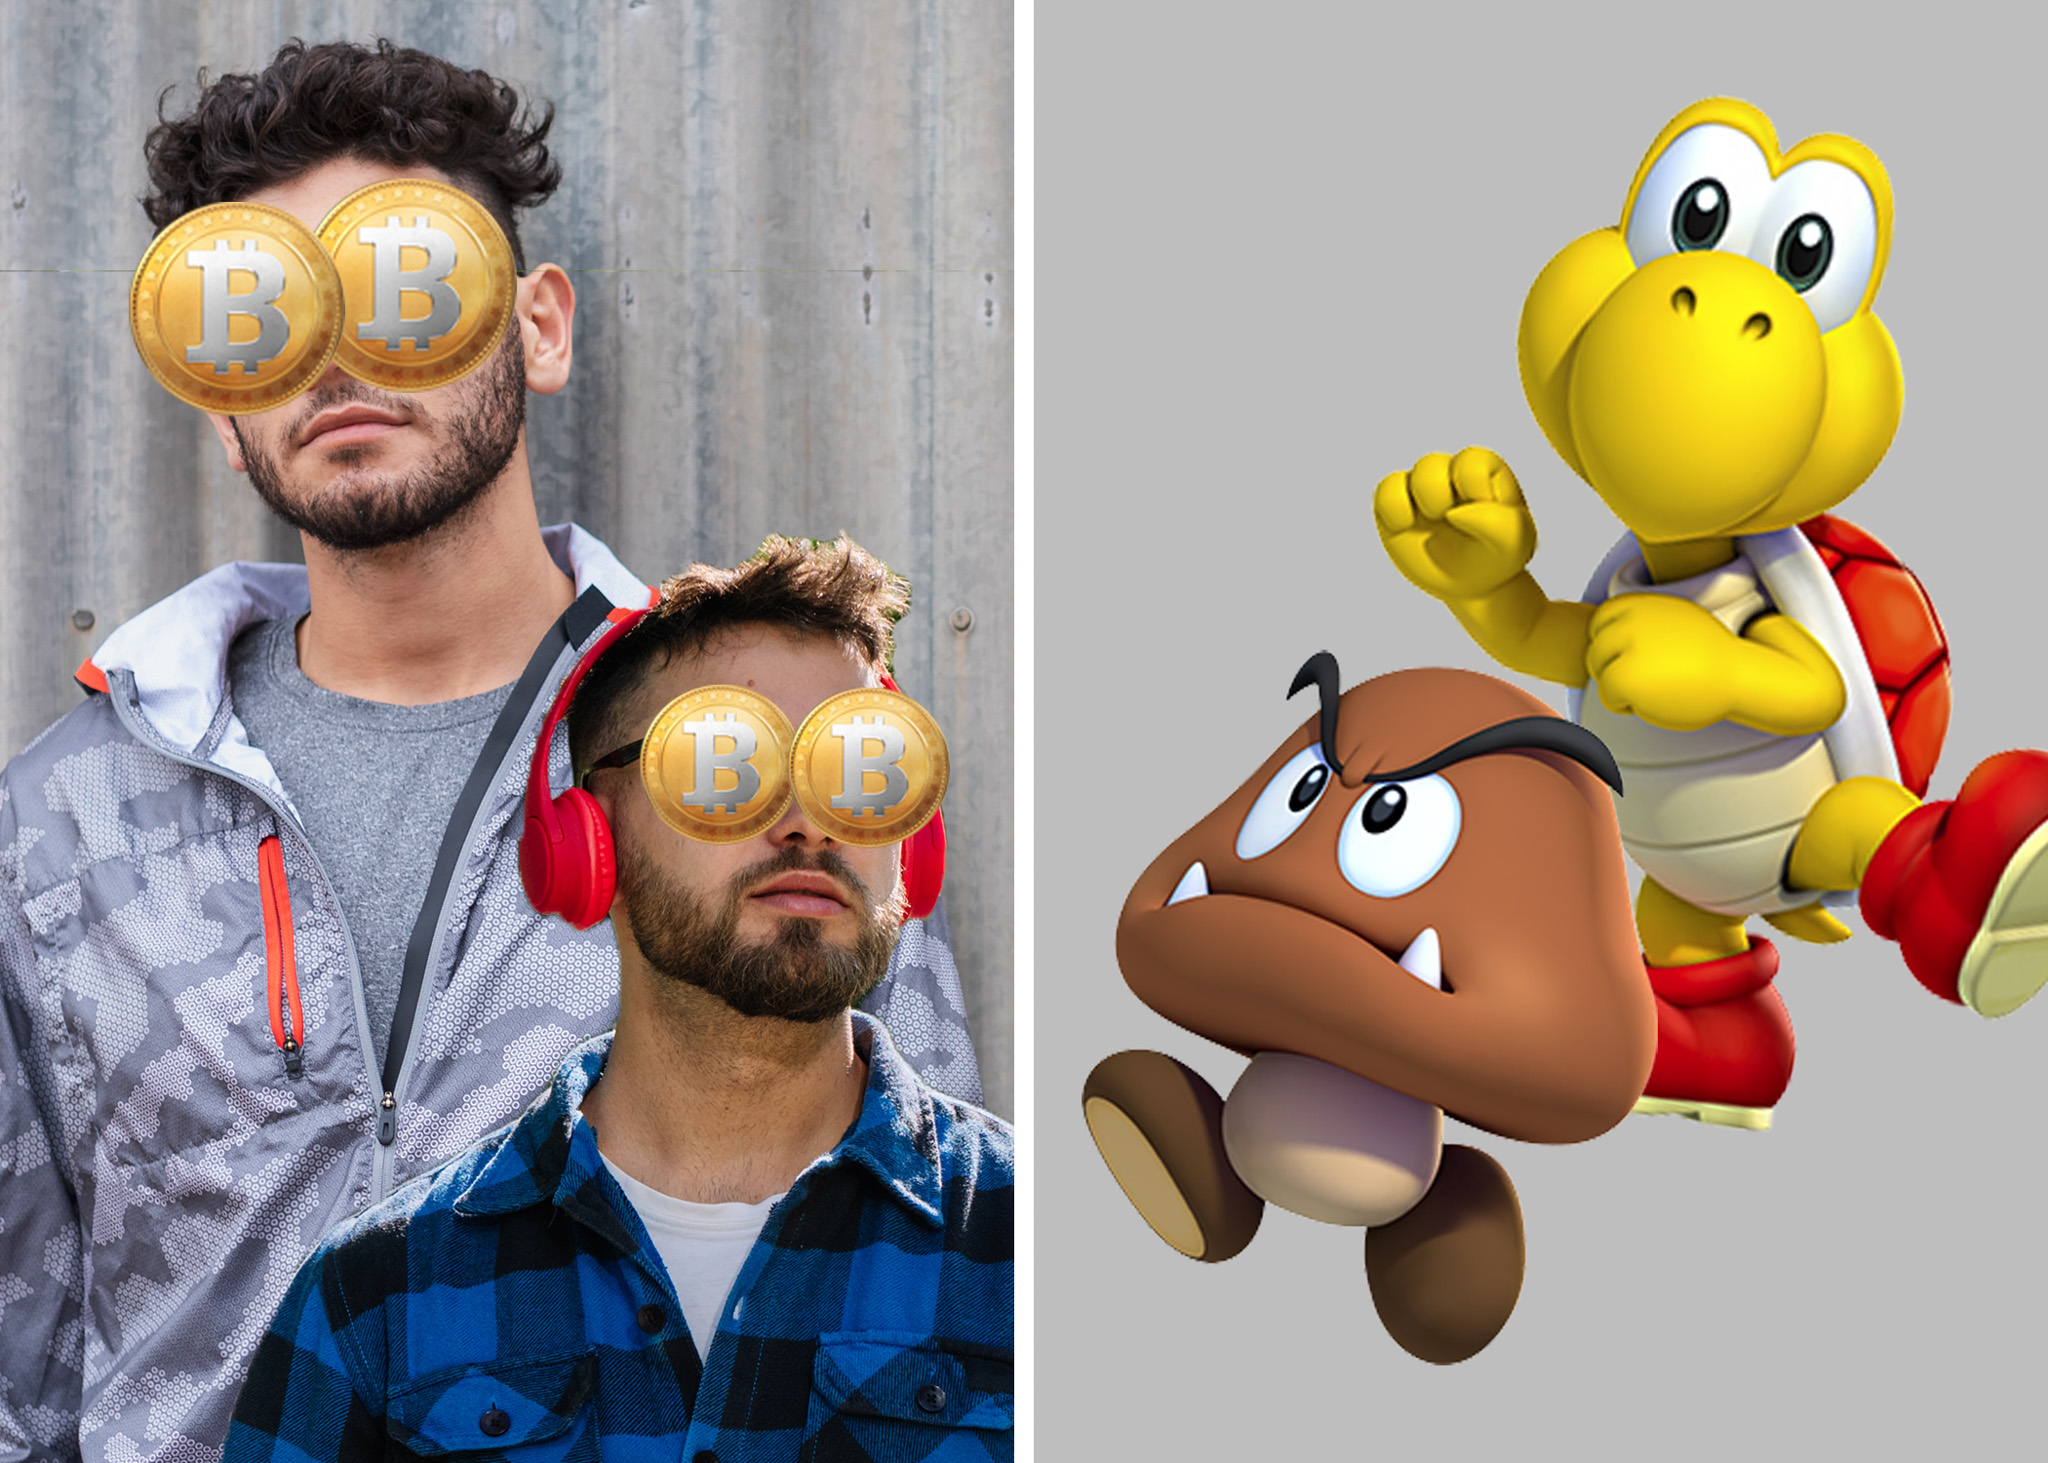 The image features two men with Bitcoin coins as eyes on the left, and Mario characters Goomba and Koopa Troopa on the right, with a plain background.